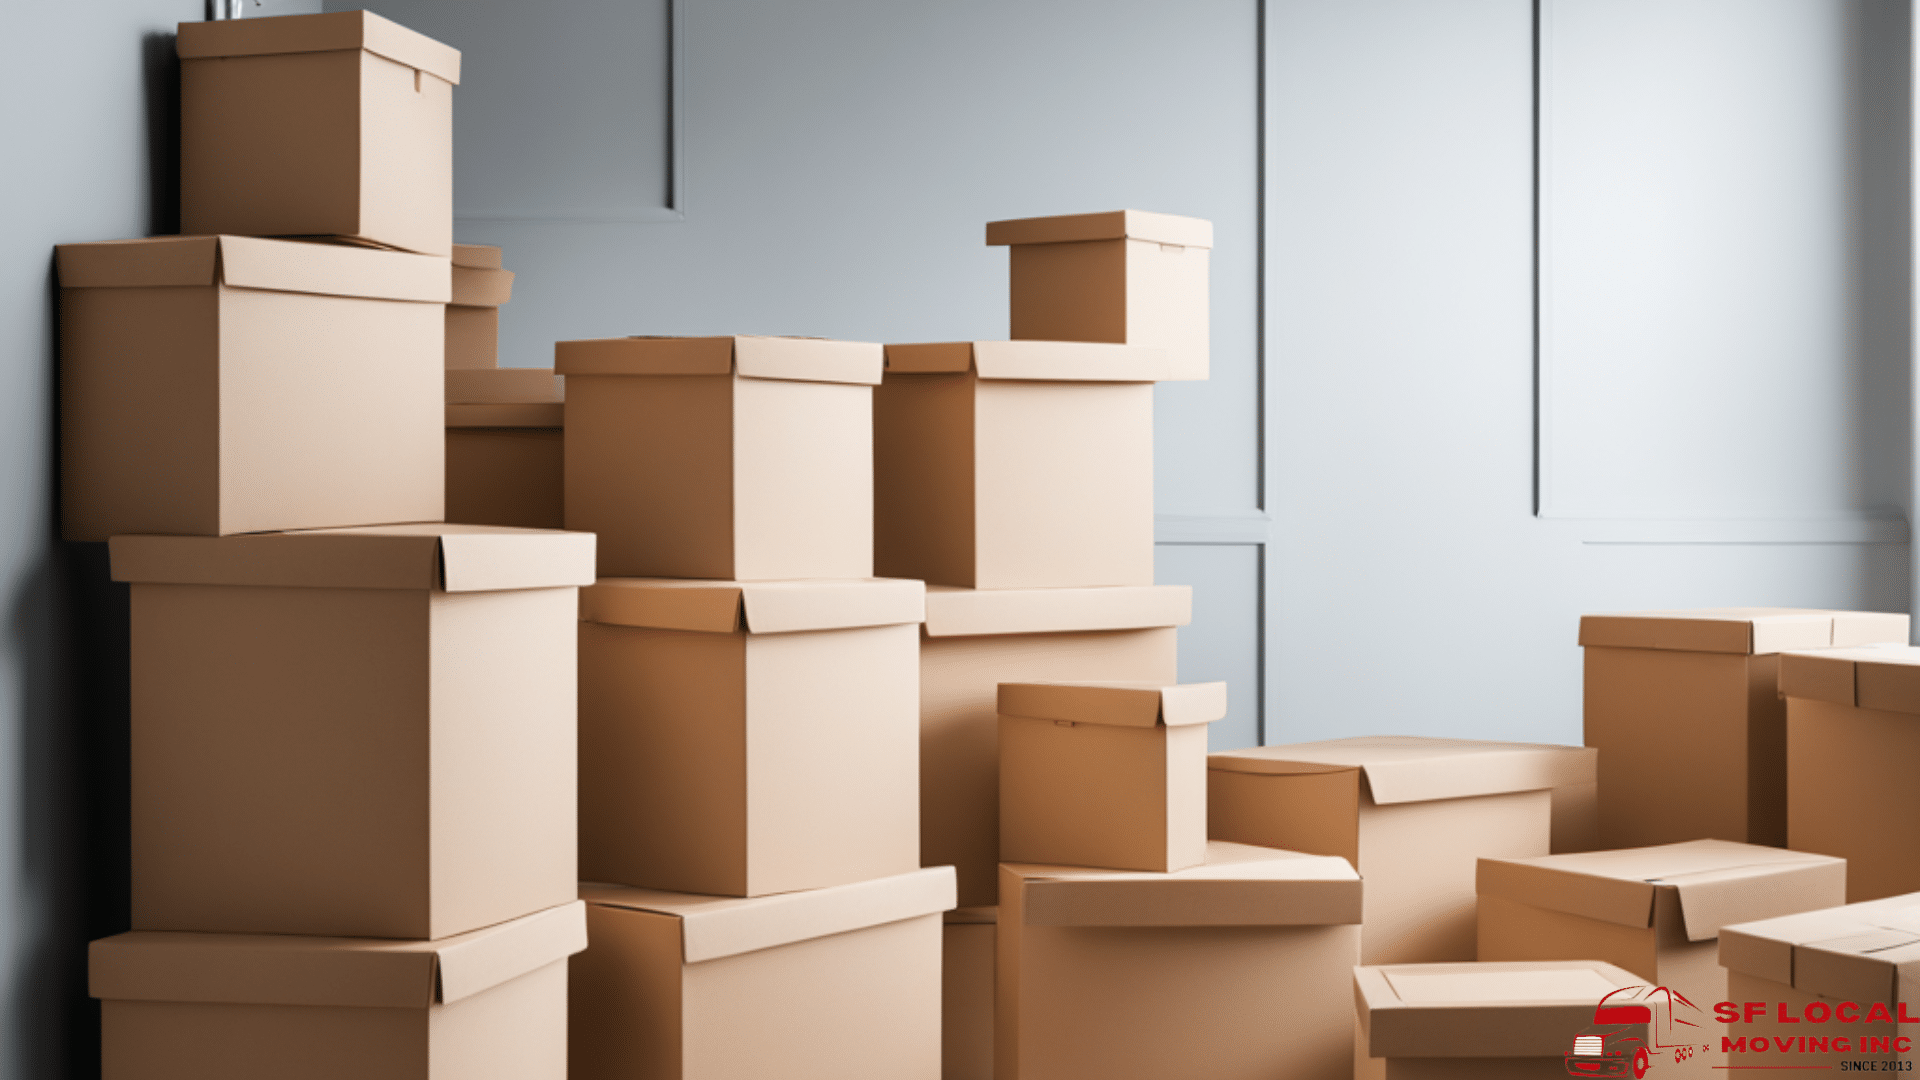 Packing and Moving Movers Companies in Hialeah Florida